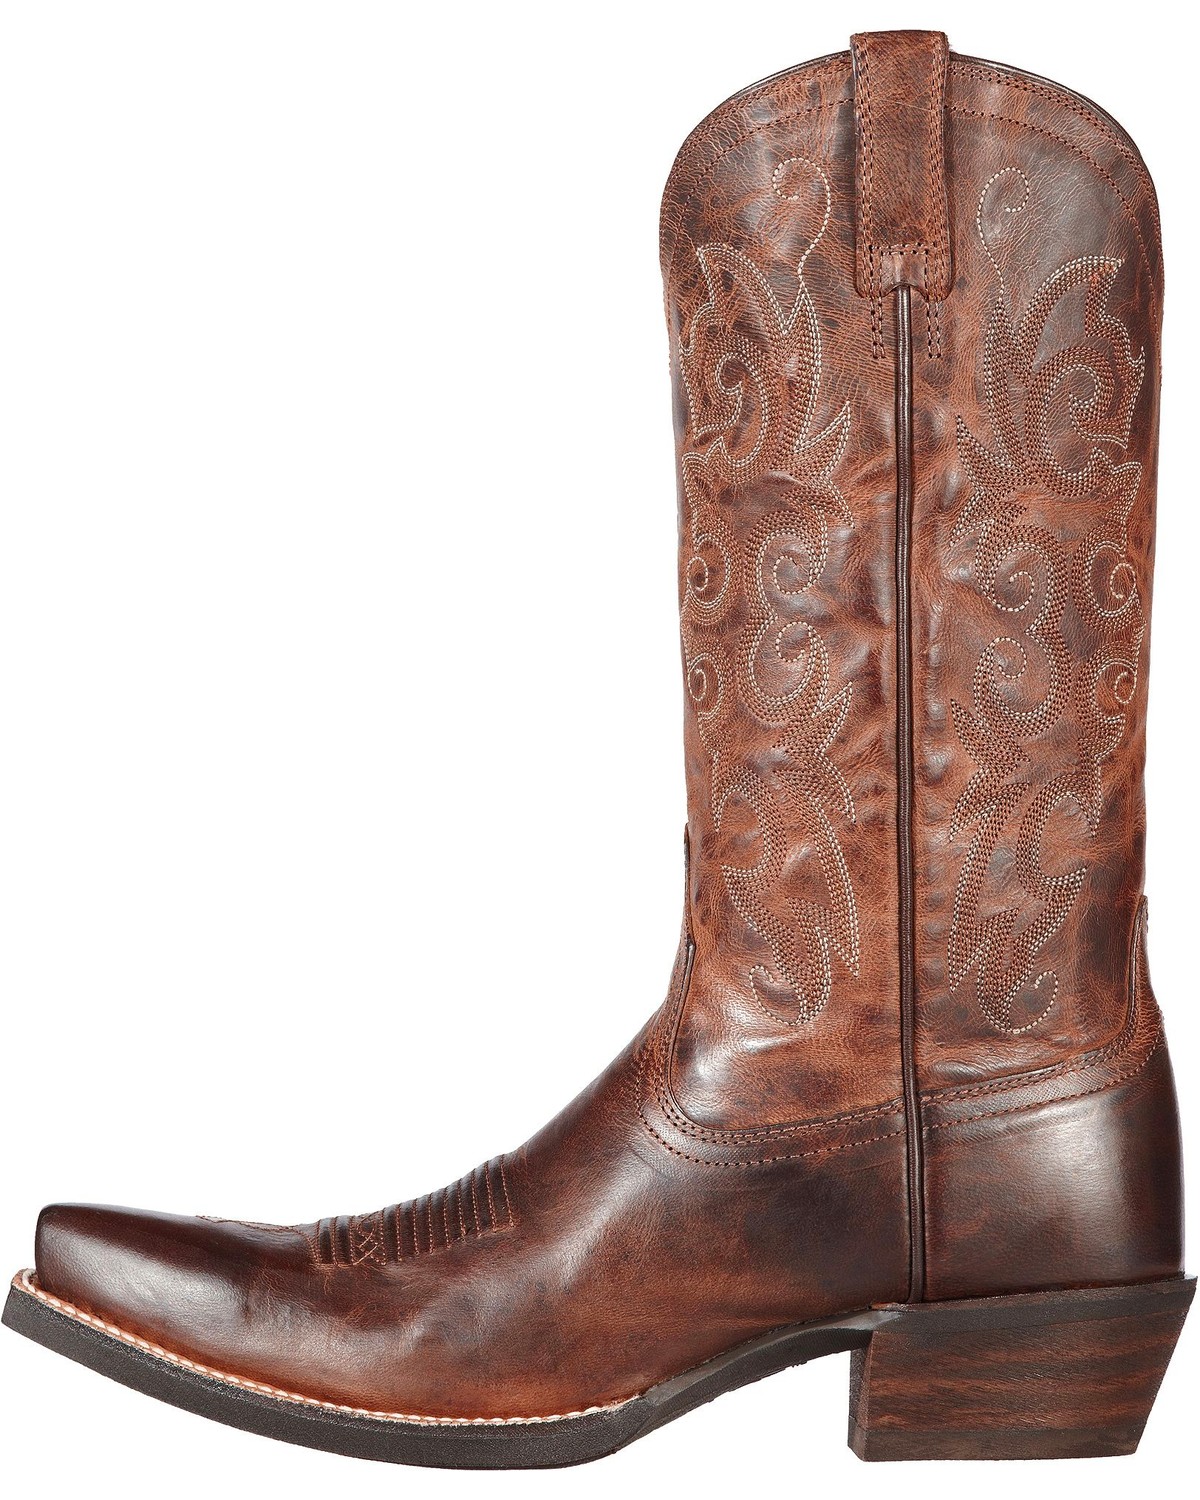 Ariat Alabama Cowgirl Boots - Snip Toe | Sheplers